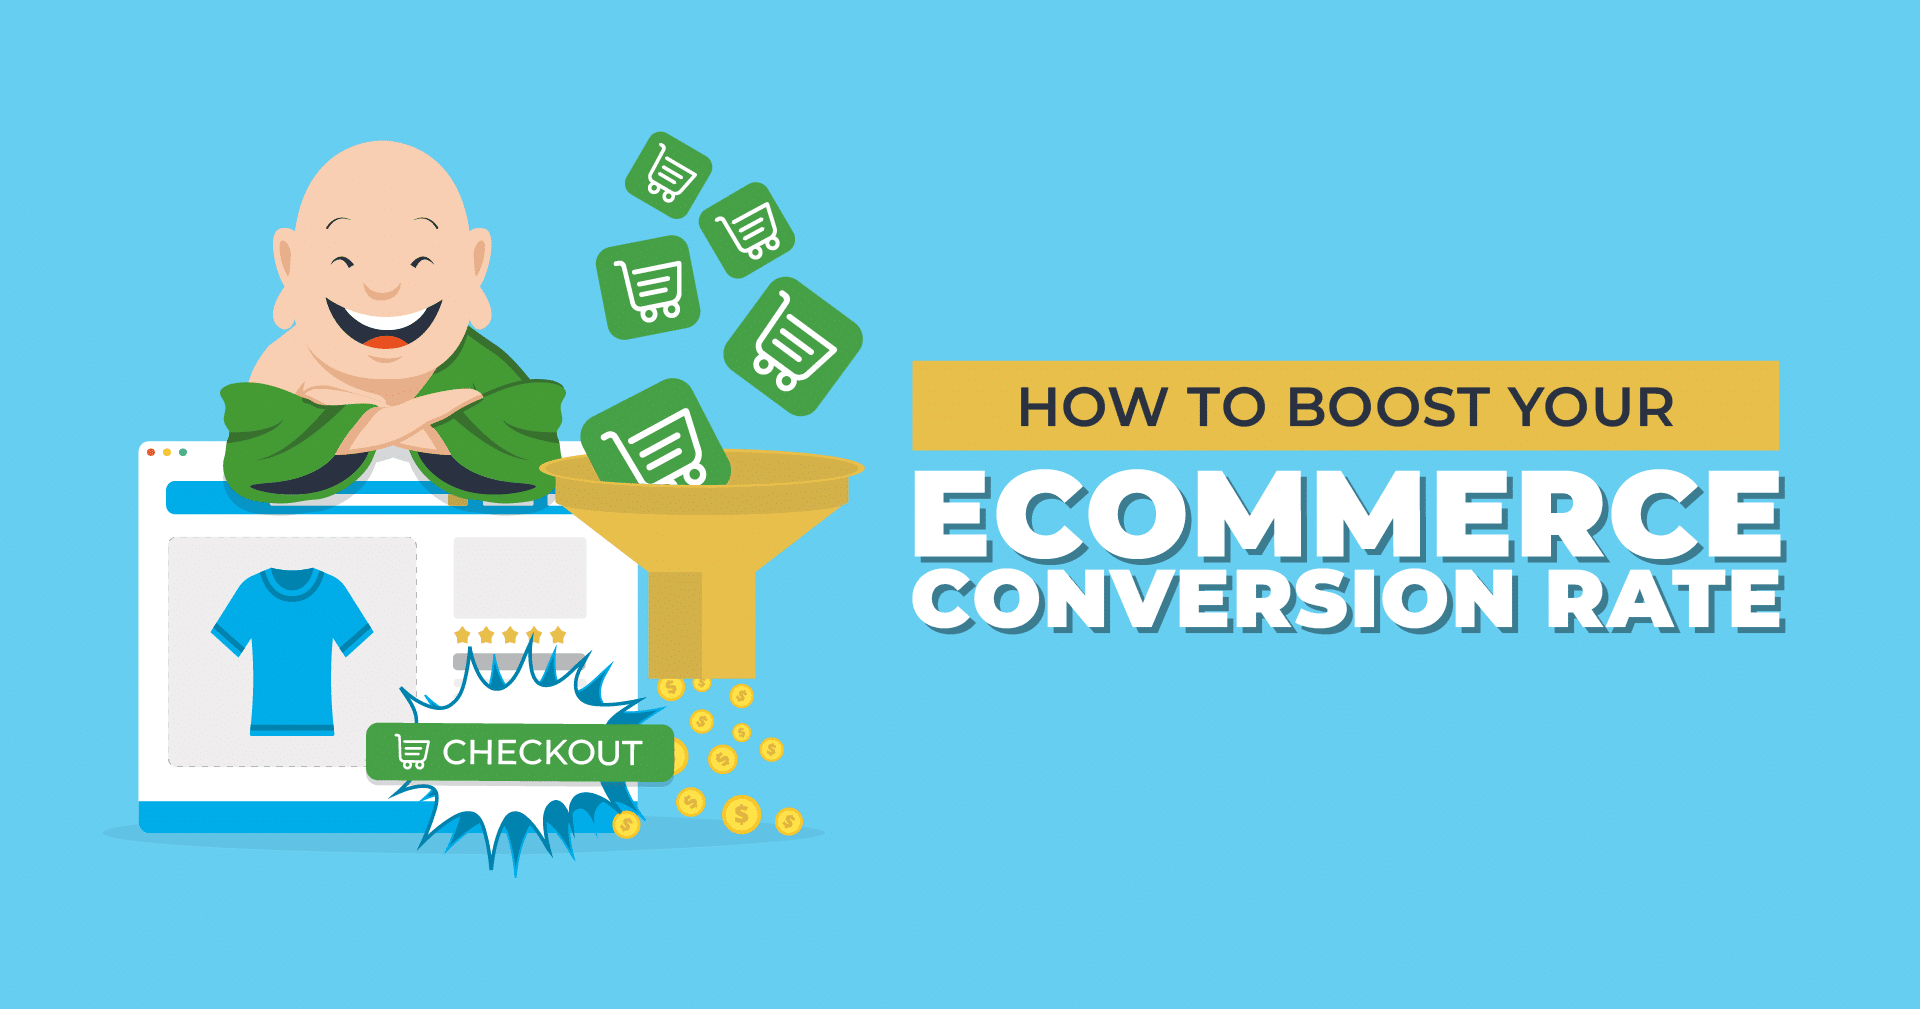 How to Boost Your Ecommerce Conversion Rate